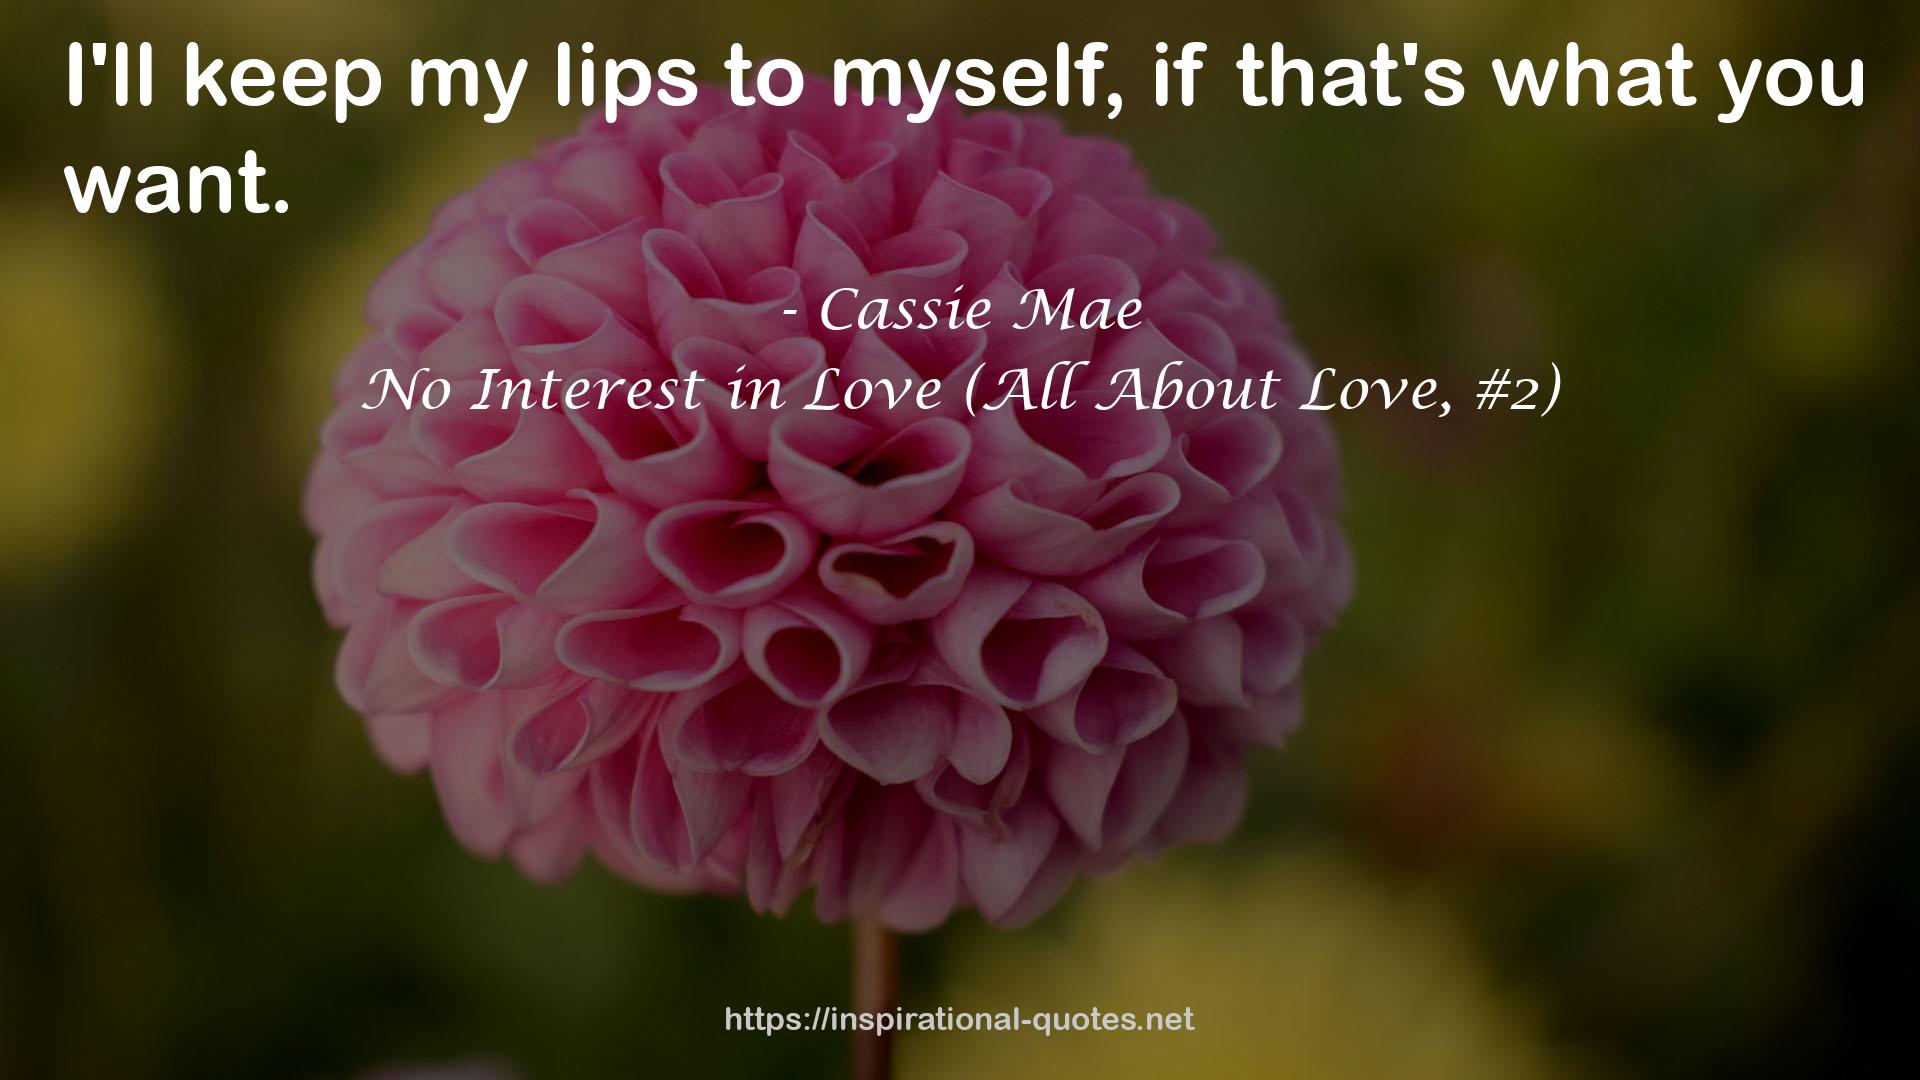 No Interest in Love (All About Love, #2) QUOTES